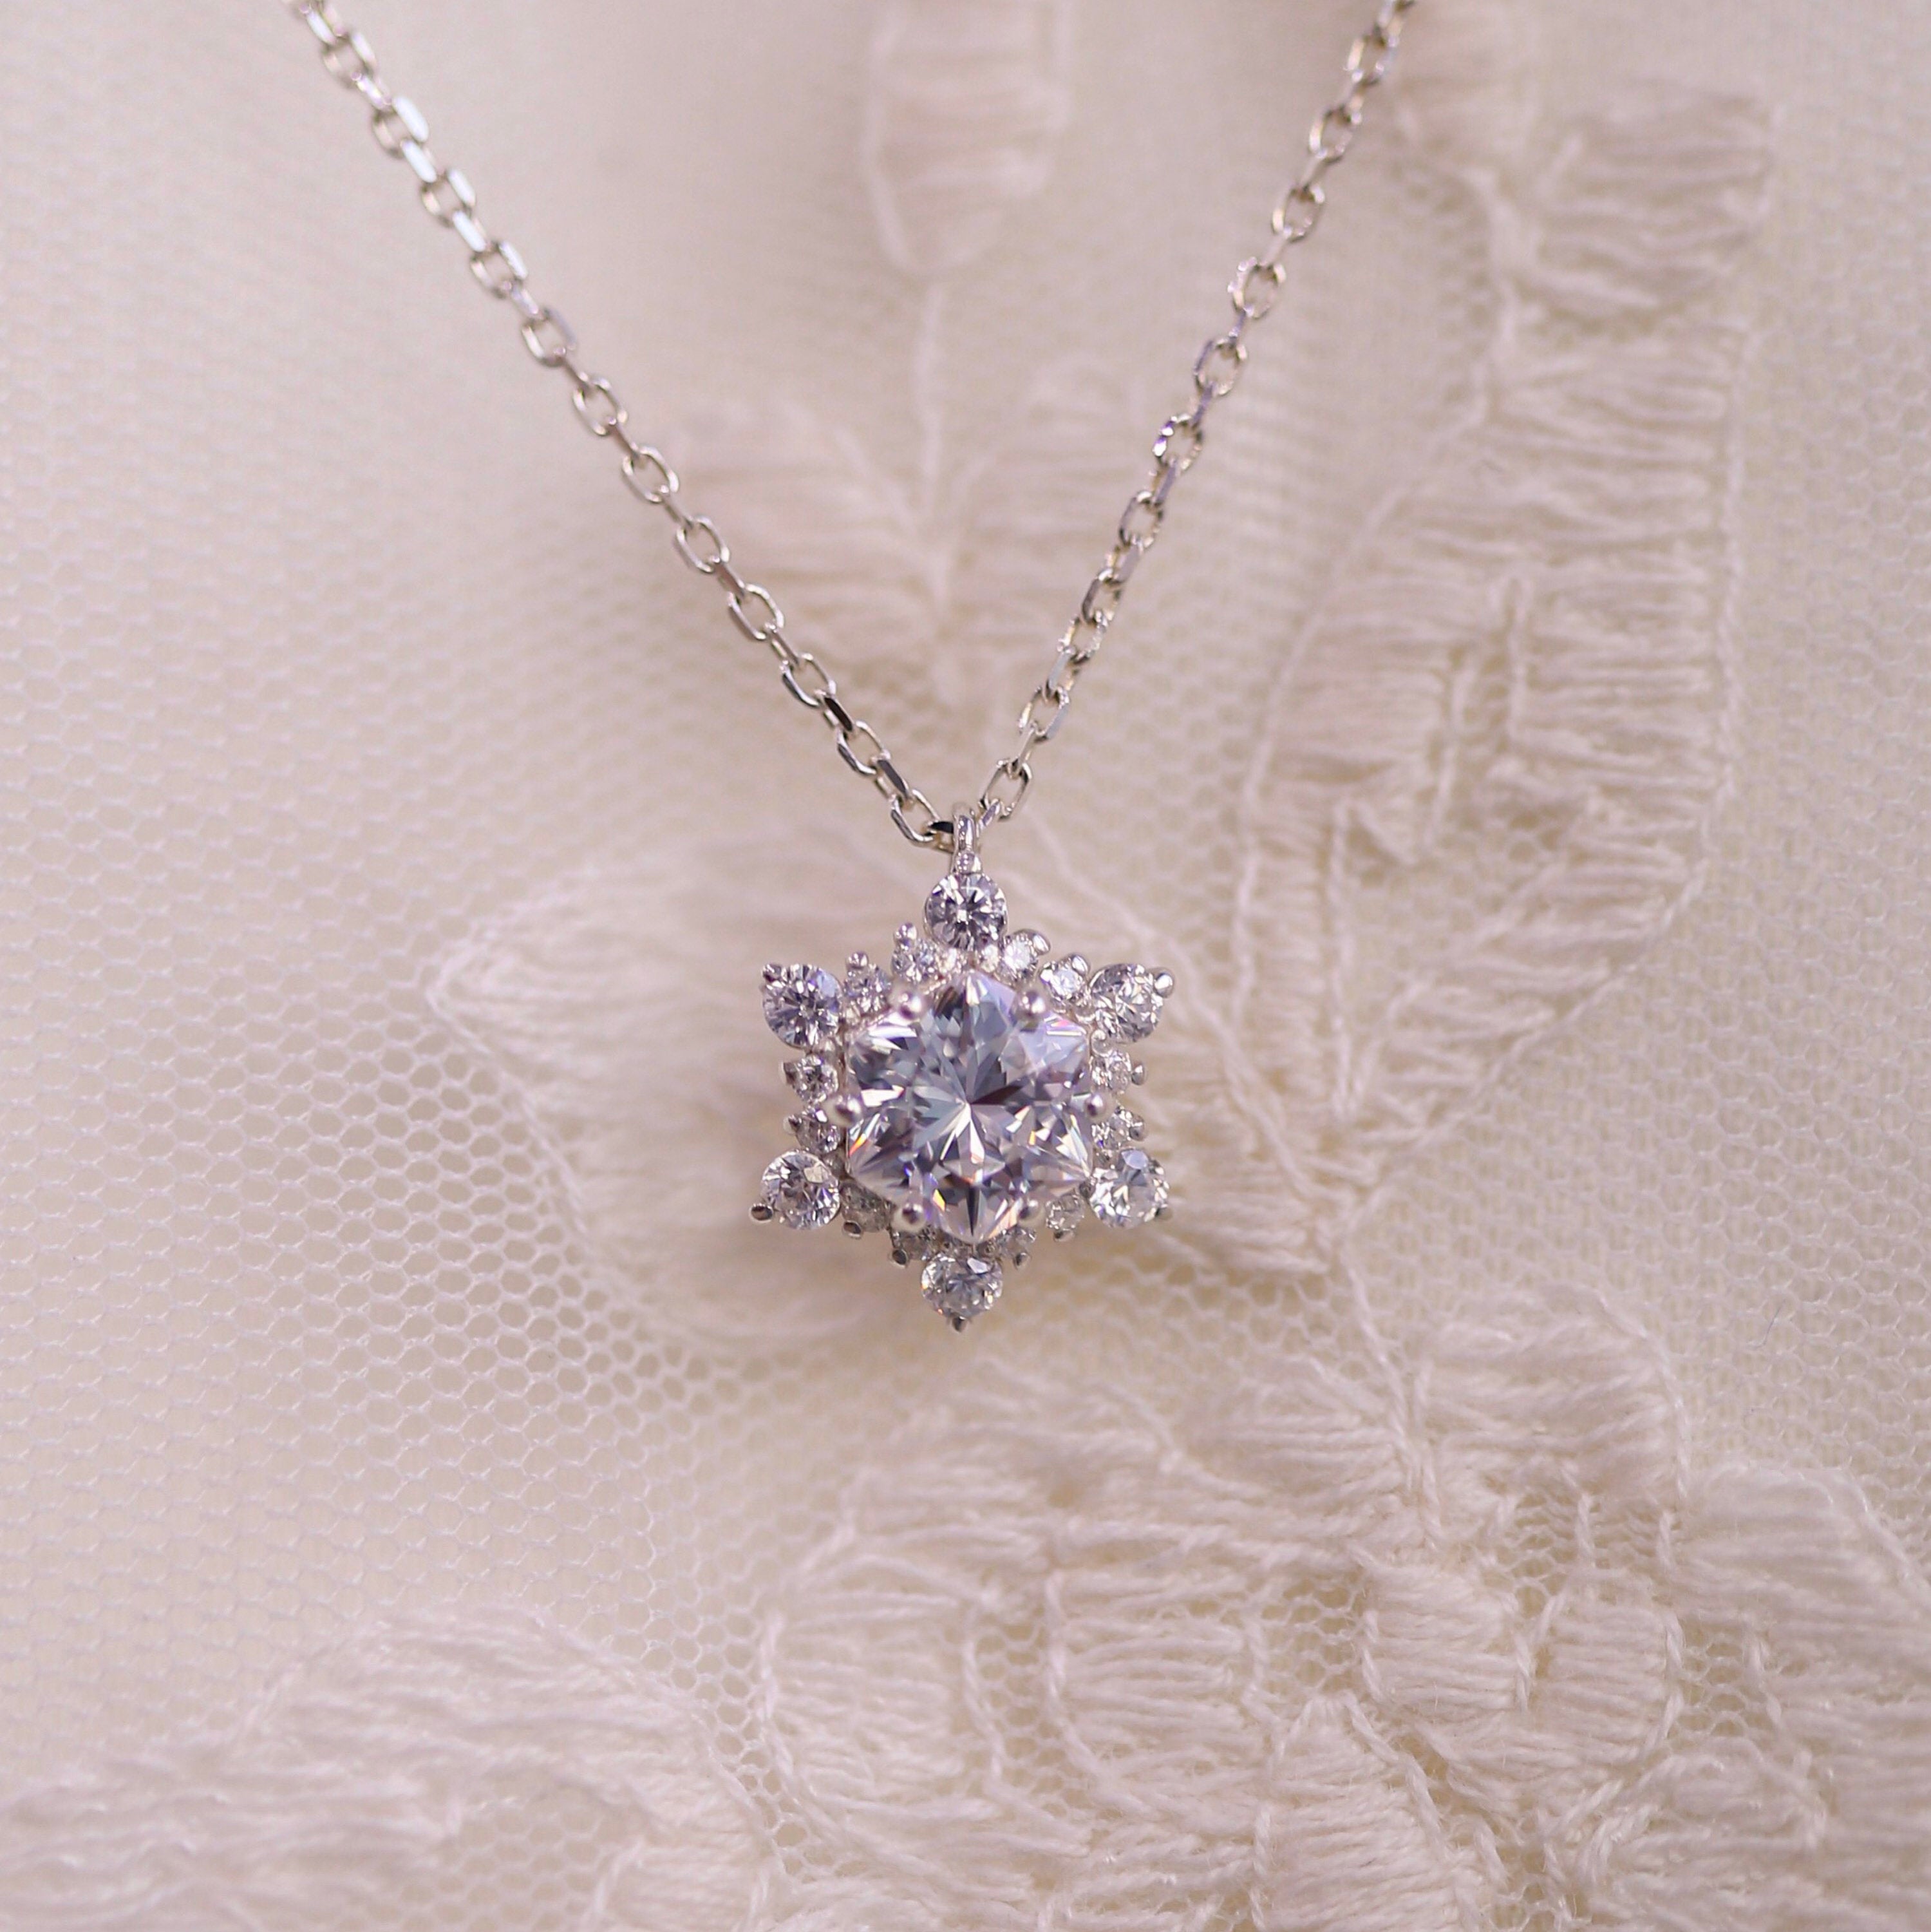 Silver Snowflake Lariat Necklace – Designed by Stacey Jewelry, LLC